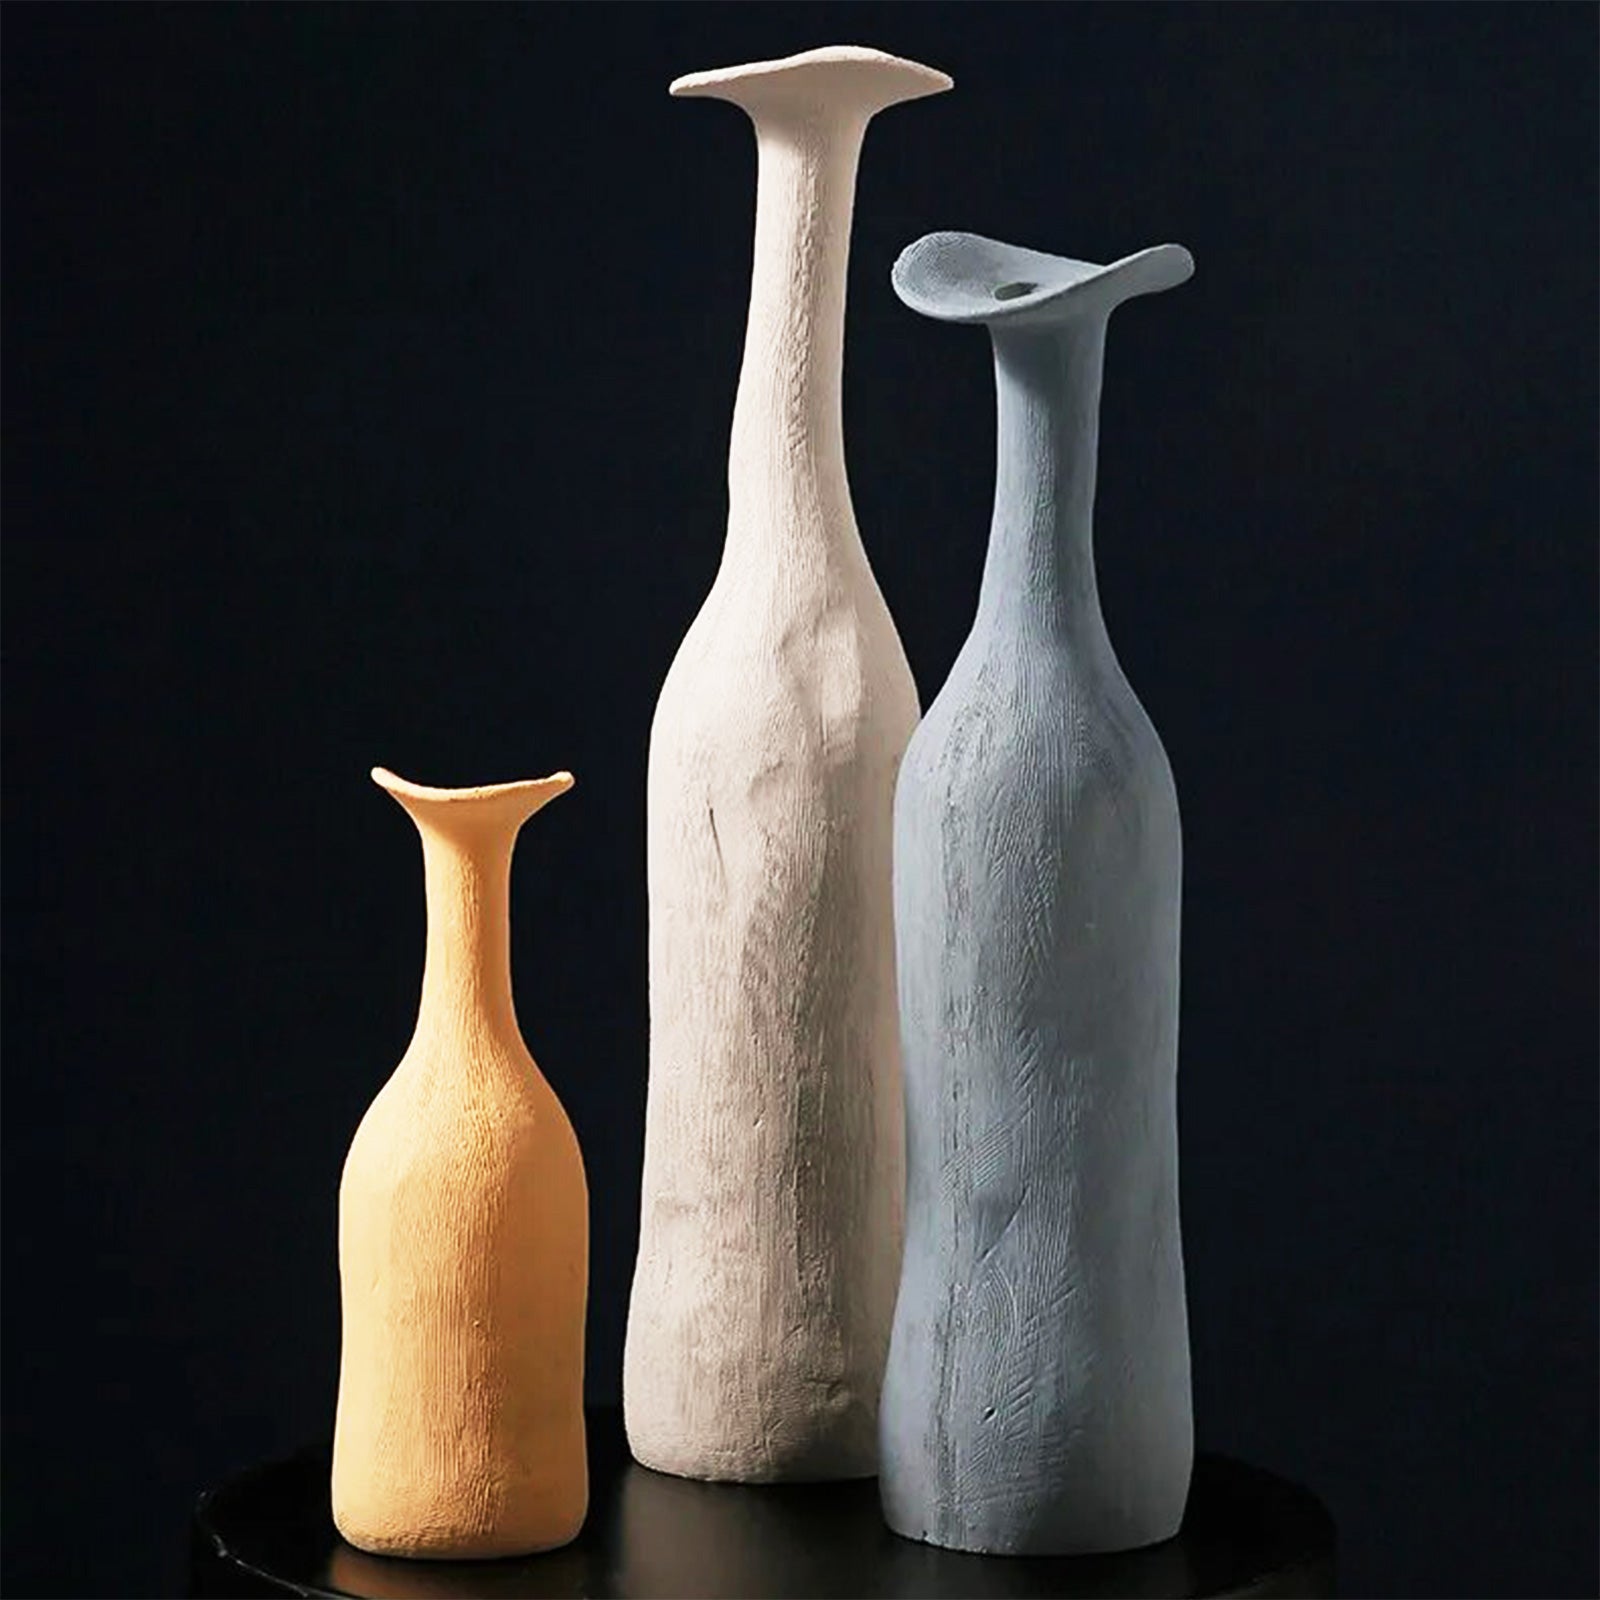 Minimal Nordic Vases with Playful Shape